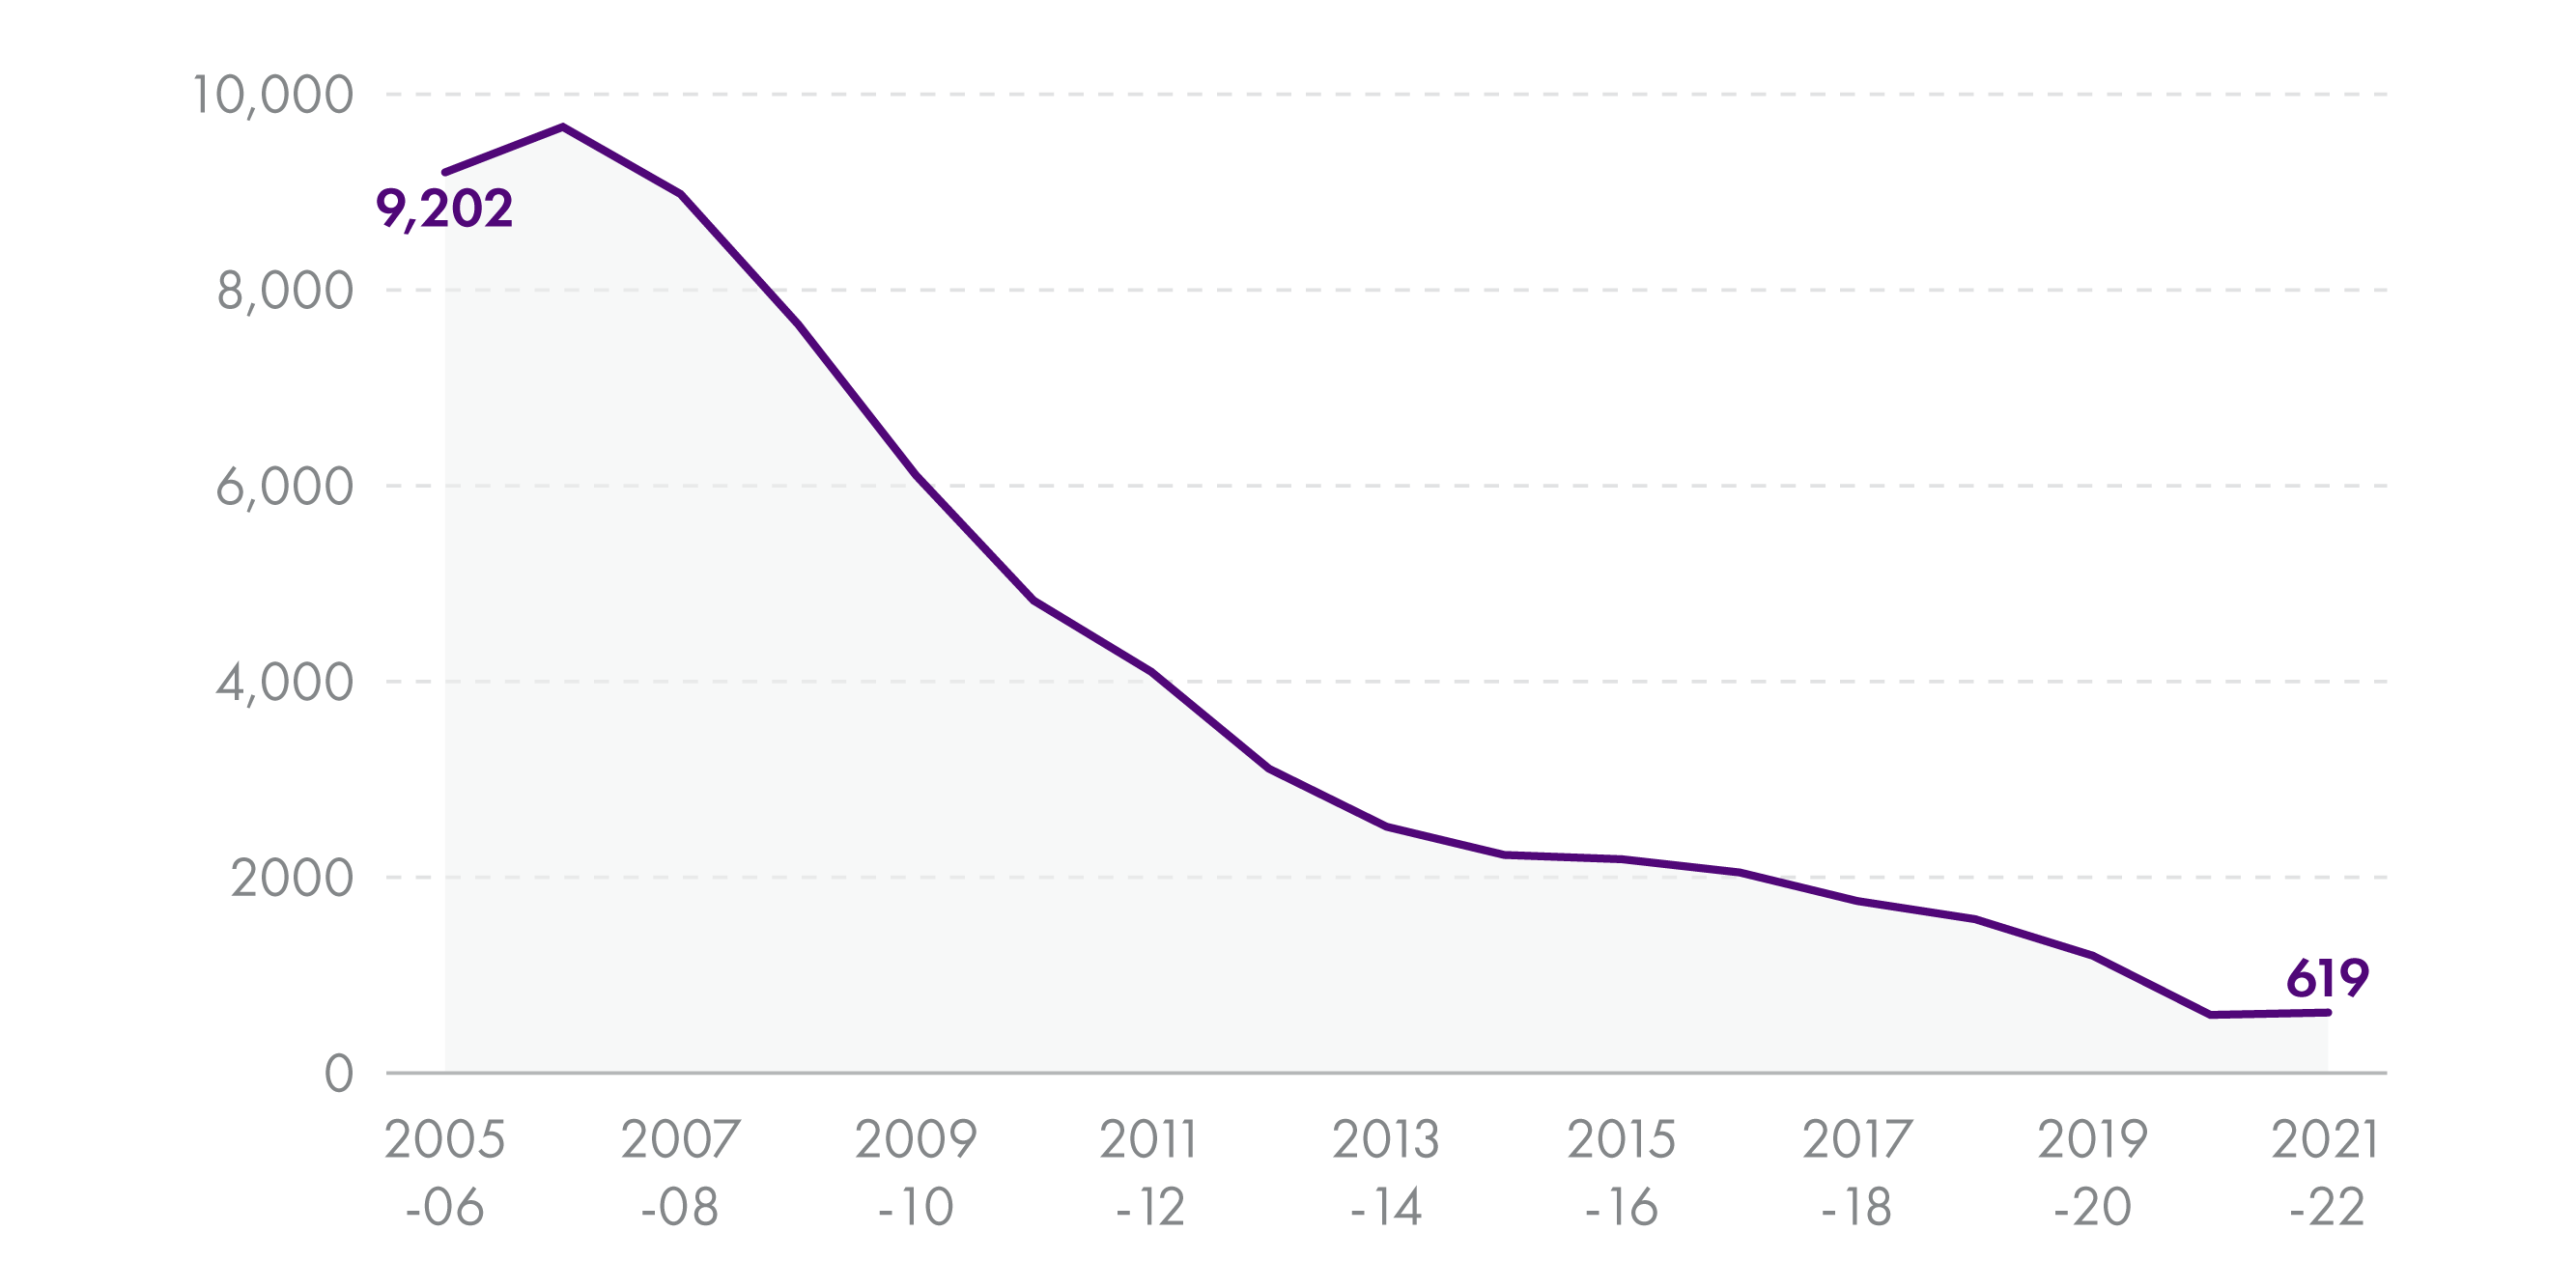 Line graph showing the number of proceedings against children age 16 and 17 years old in the criminal courts has fallen from 9,202 in 2005-06 to 619 in 2021-22.